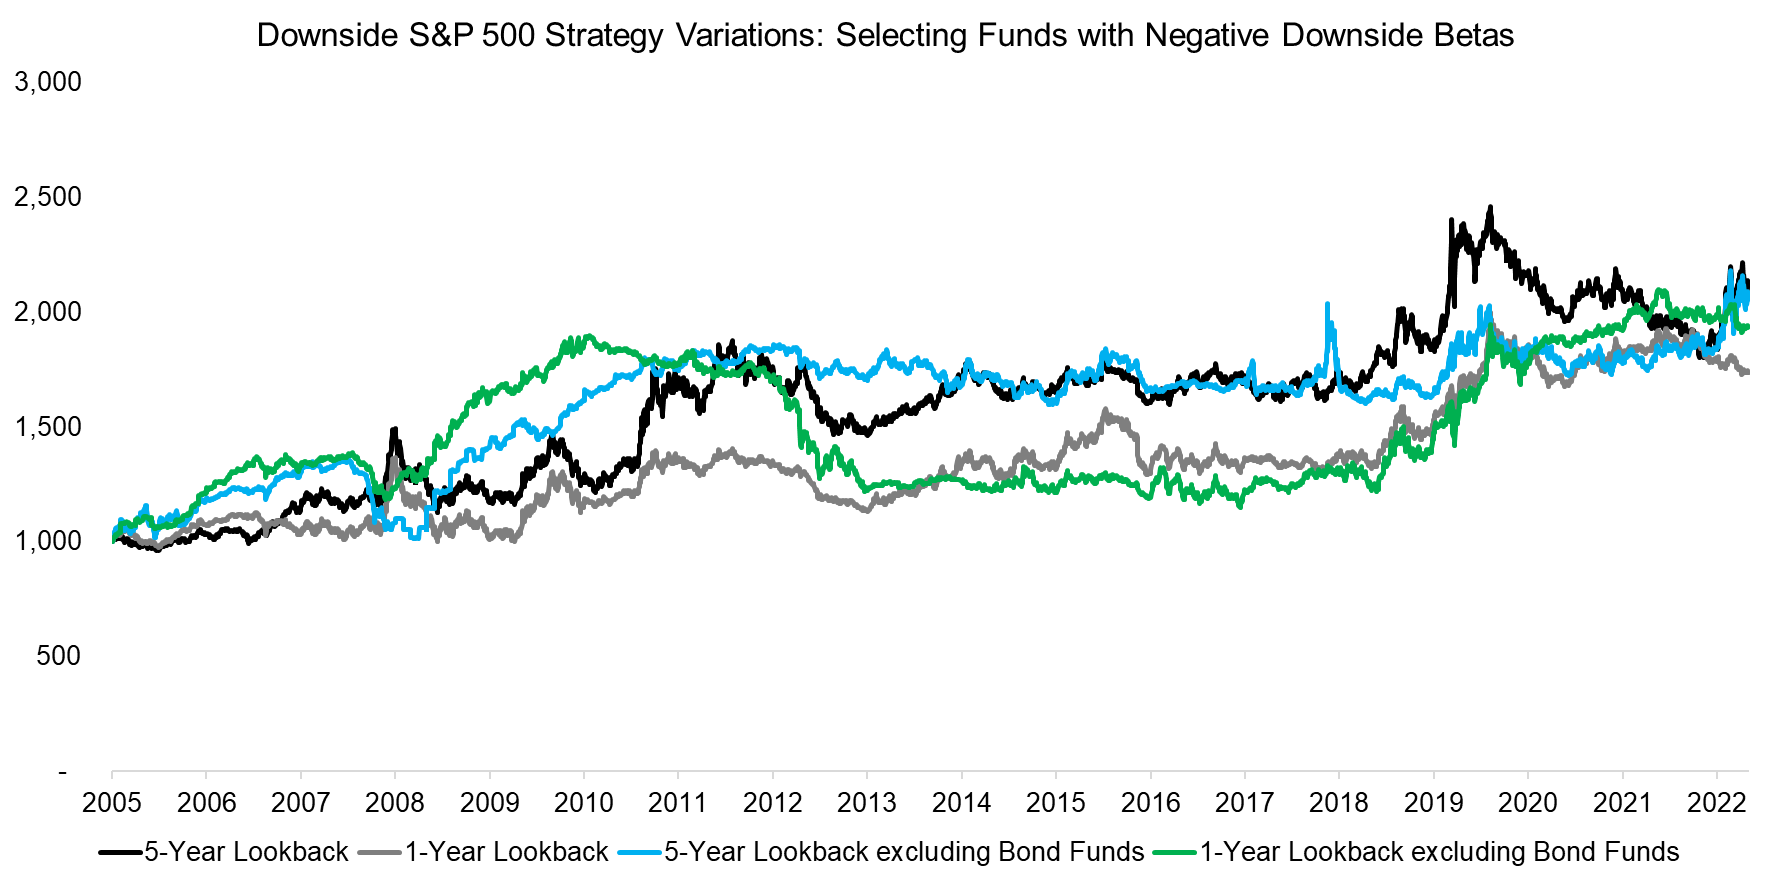 Downside S&P 500 Strategy Variations Selecting Funds with Negative Downside Betas